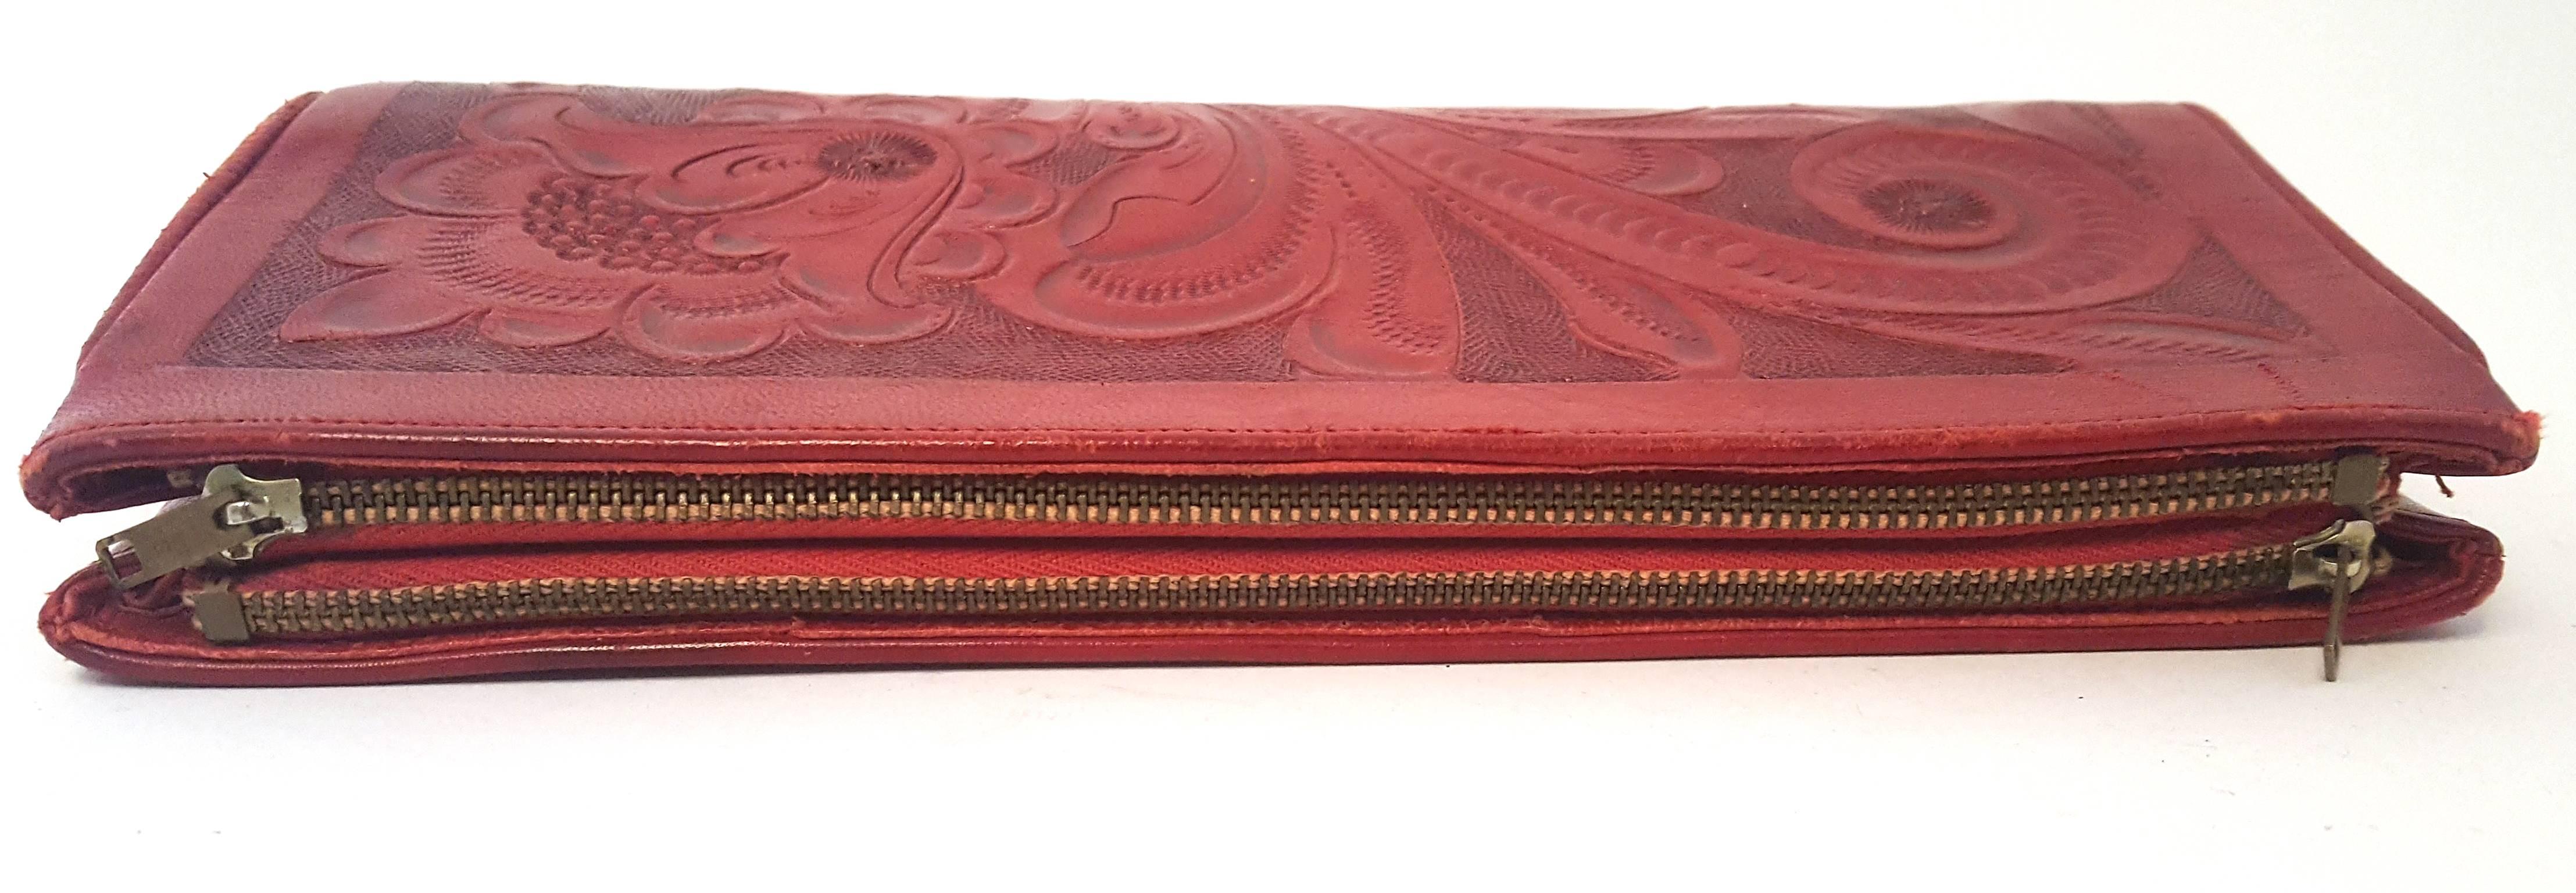 50s Red Mexican Hand Tooled Clutch 1